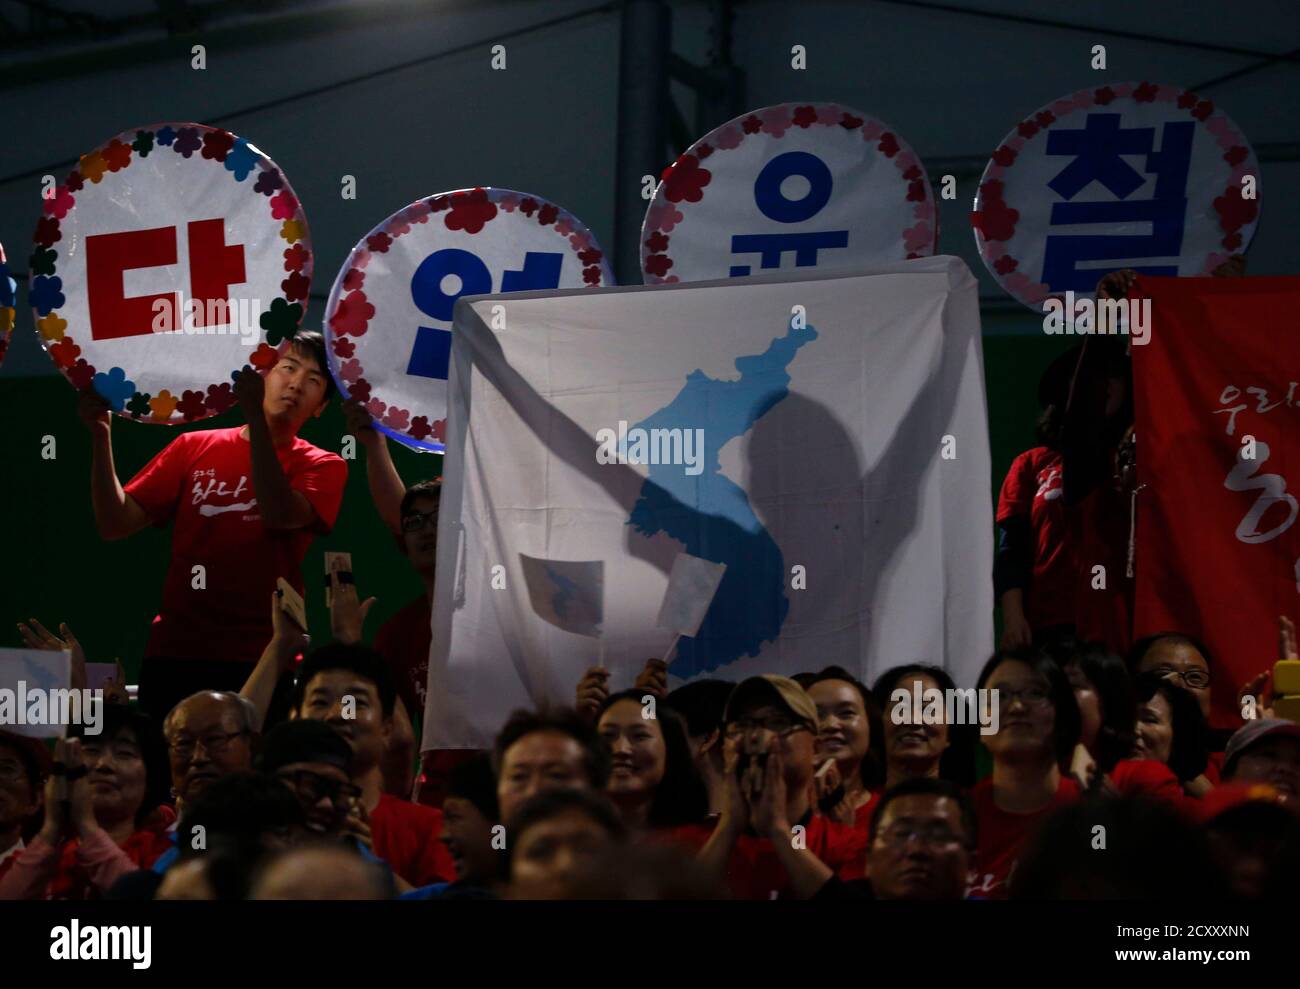 A sports fan holds up a map of North and South Korea as one land mass after North Korea's Om Yun Chol won the gold medal in the men's 56kg weightlifting competition at the Moonlight Festival Garden during the 17th Asian Games in Incheon September 20, 2014. Om broke his own clean and jerk world record on the way to winning his country's first gold medal of the Asian Games in Incheon on Saturday. The North Korean weightlifter who won a gold medal at the London Olympics, raised 170 kilograms to better his old record by 1kg in the men's 56kg class. He earlier lifted 128kg in the snatch for a combi Stock Photo